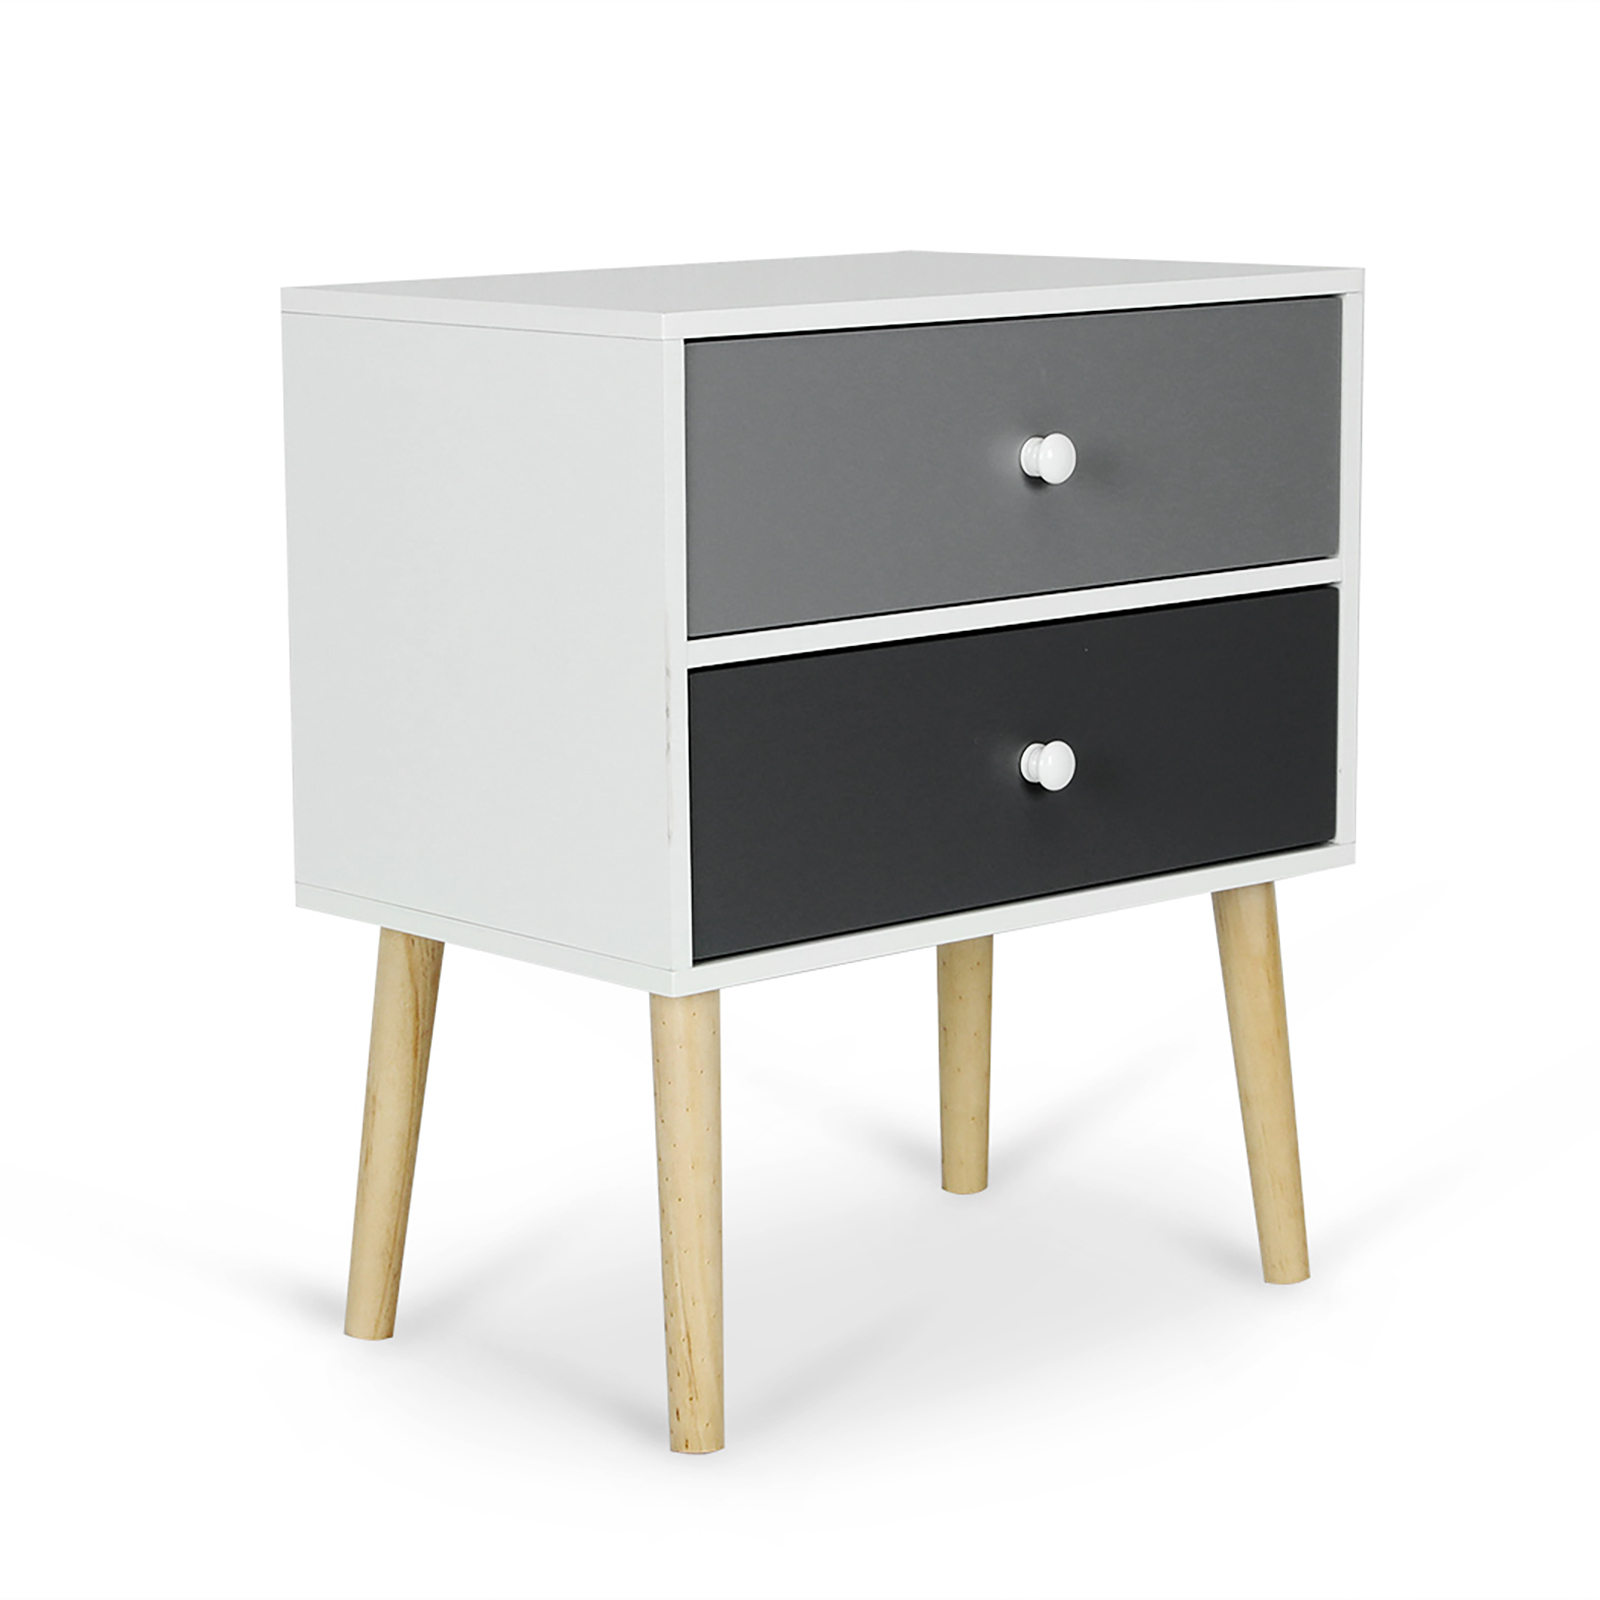   Iverson Bedside Table With 2 Drawers